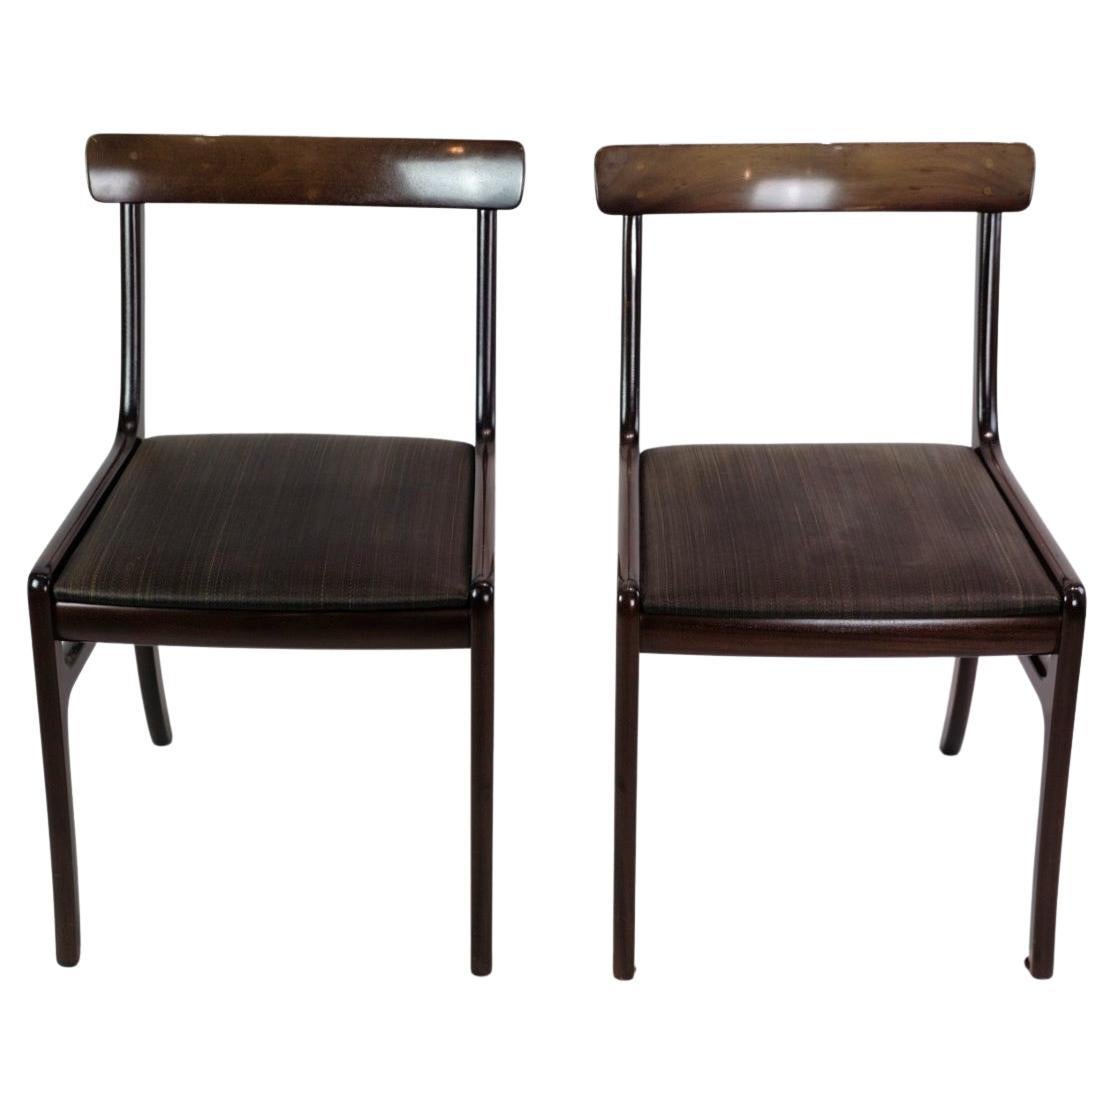 Set of Two Rungstedlund Chairs Made In Mahogany by Ole Wancher From 1960s